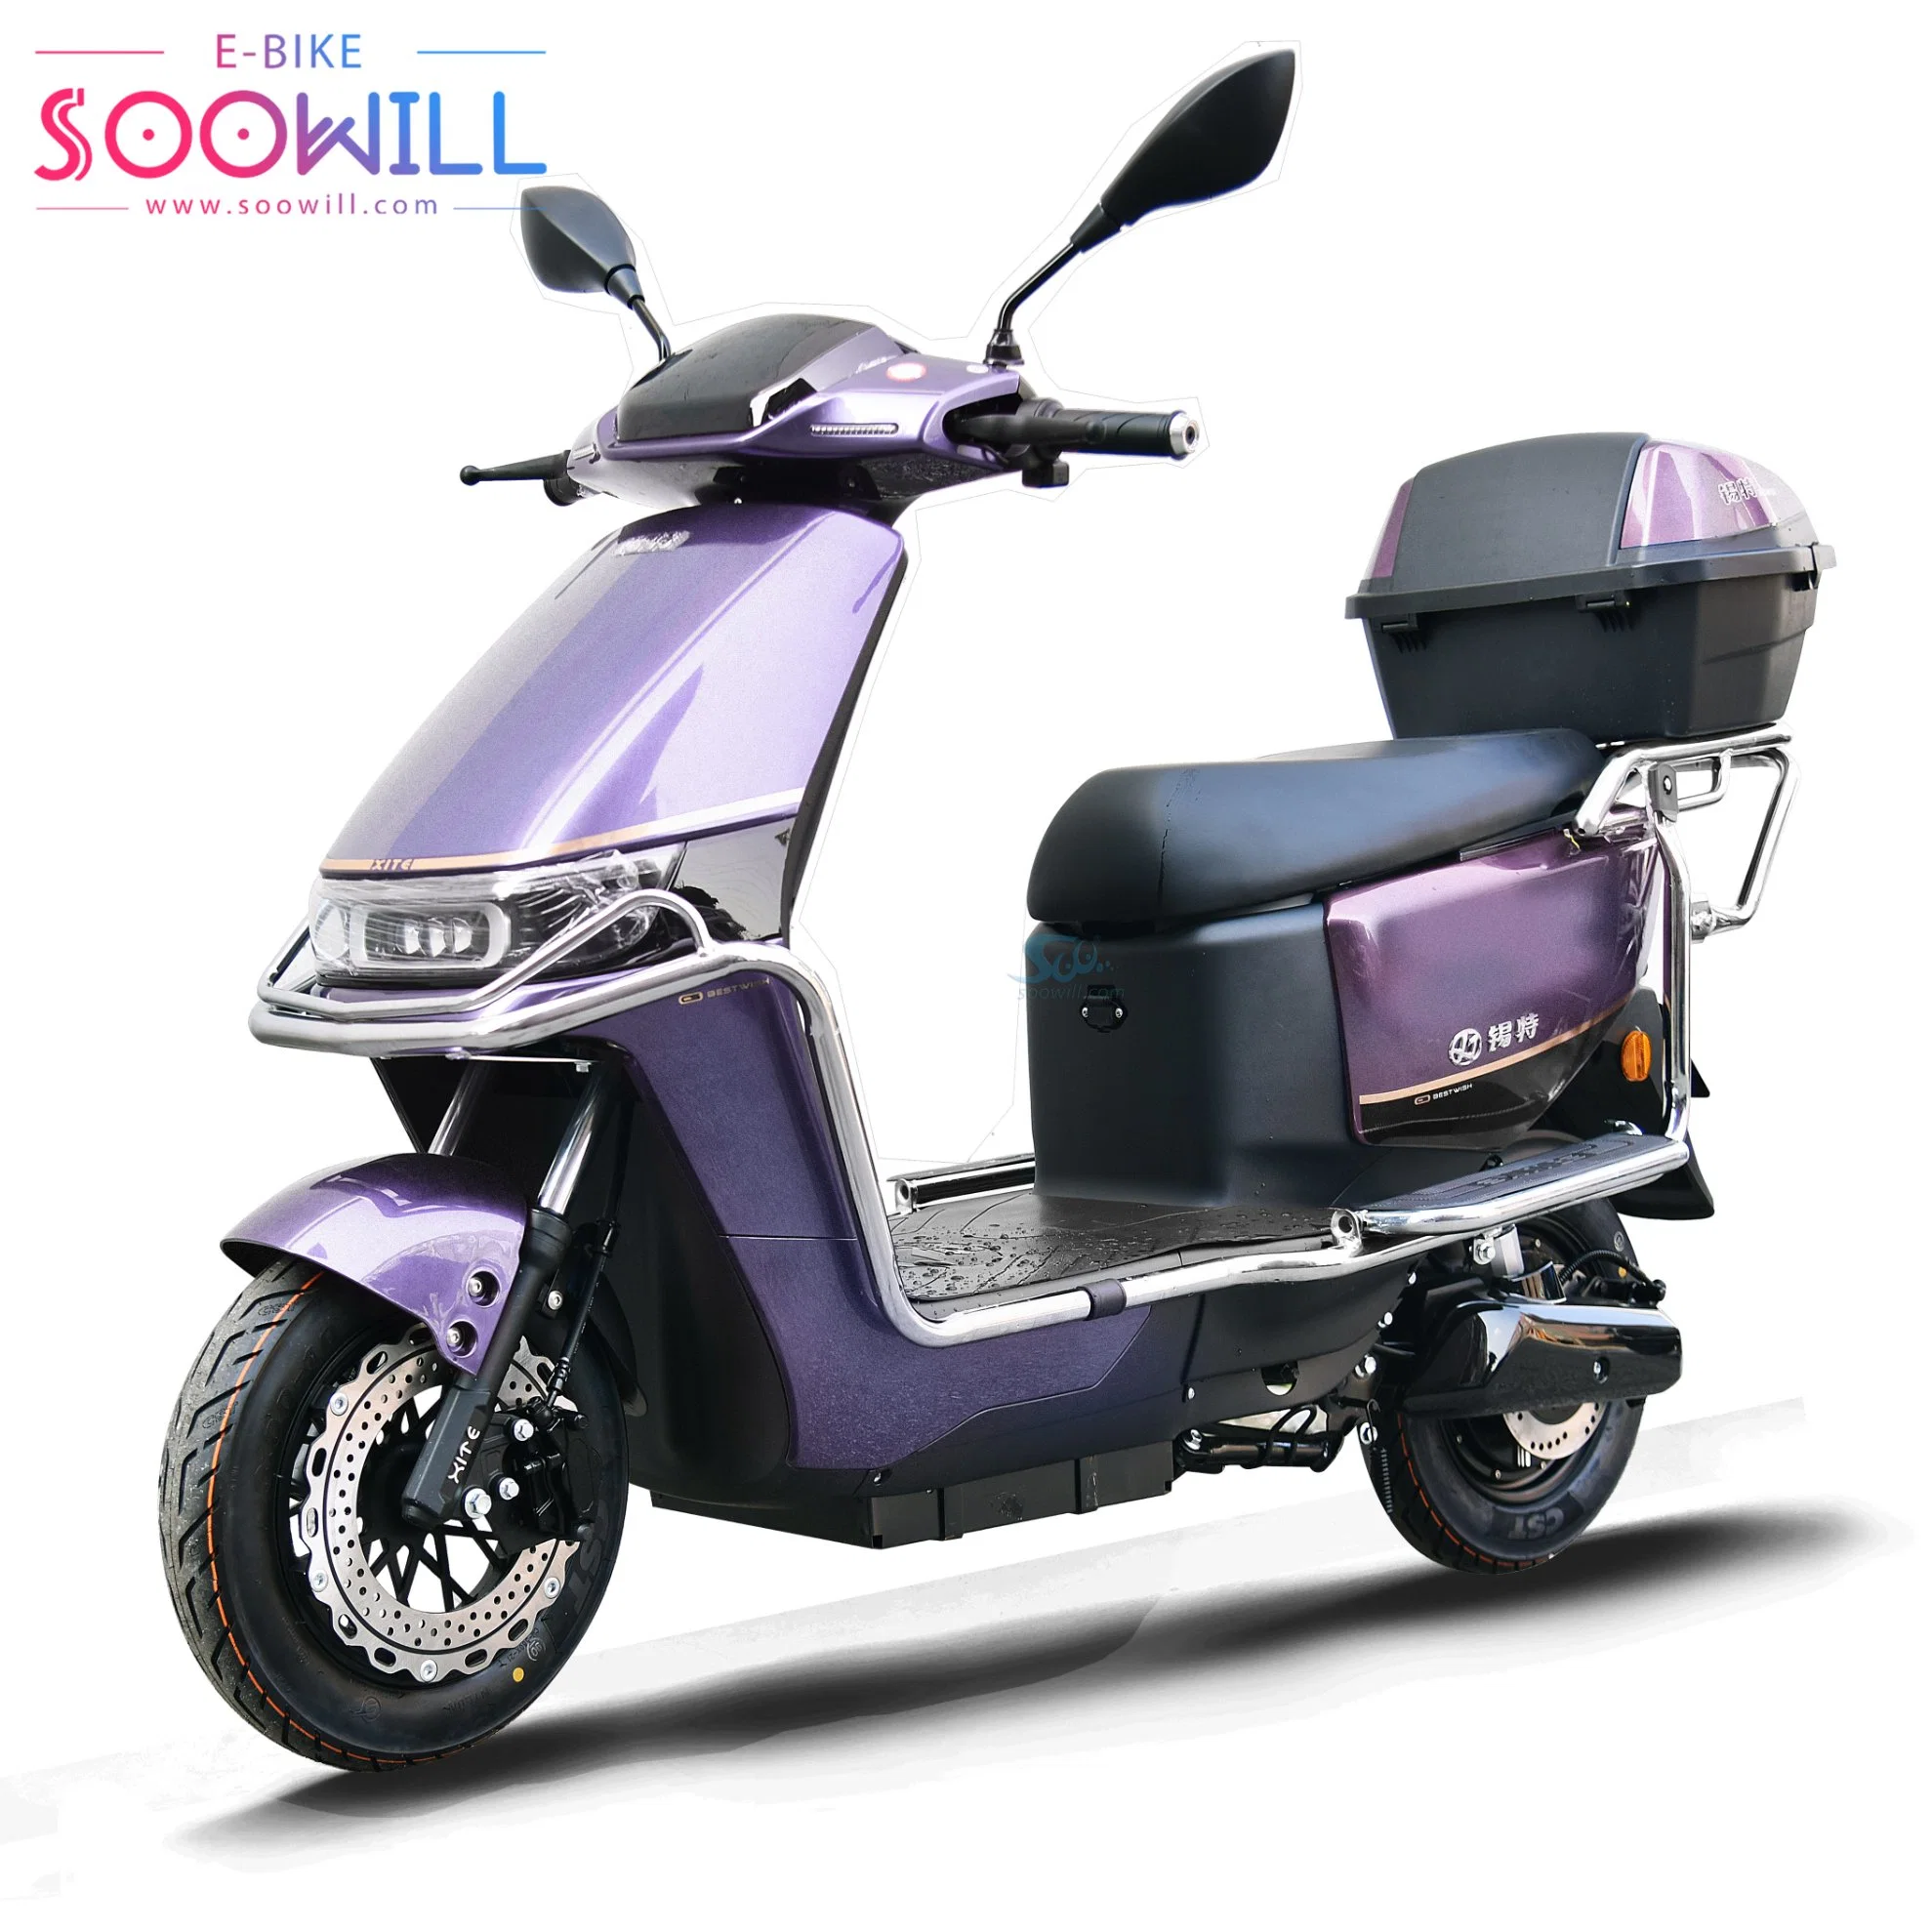 Official Mobility Scooter and Scooters Motorbike Modern Electric Bike for Sale 800W Brush-Less DC Motor Electric Motorcycle